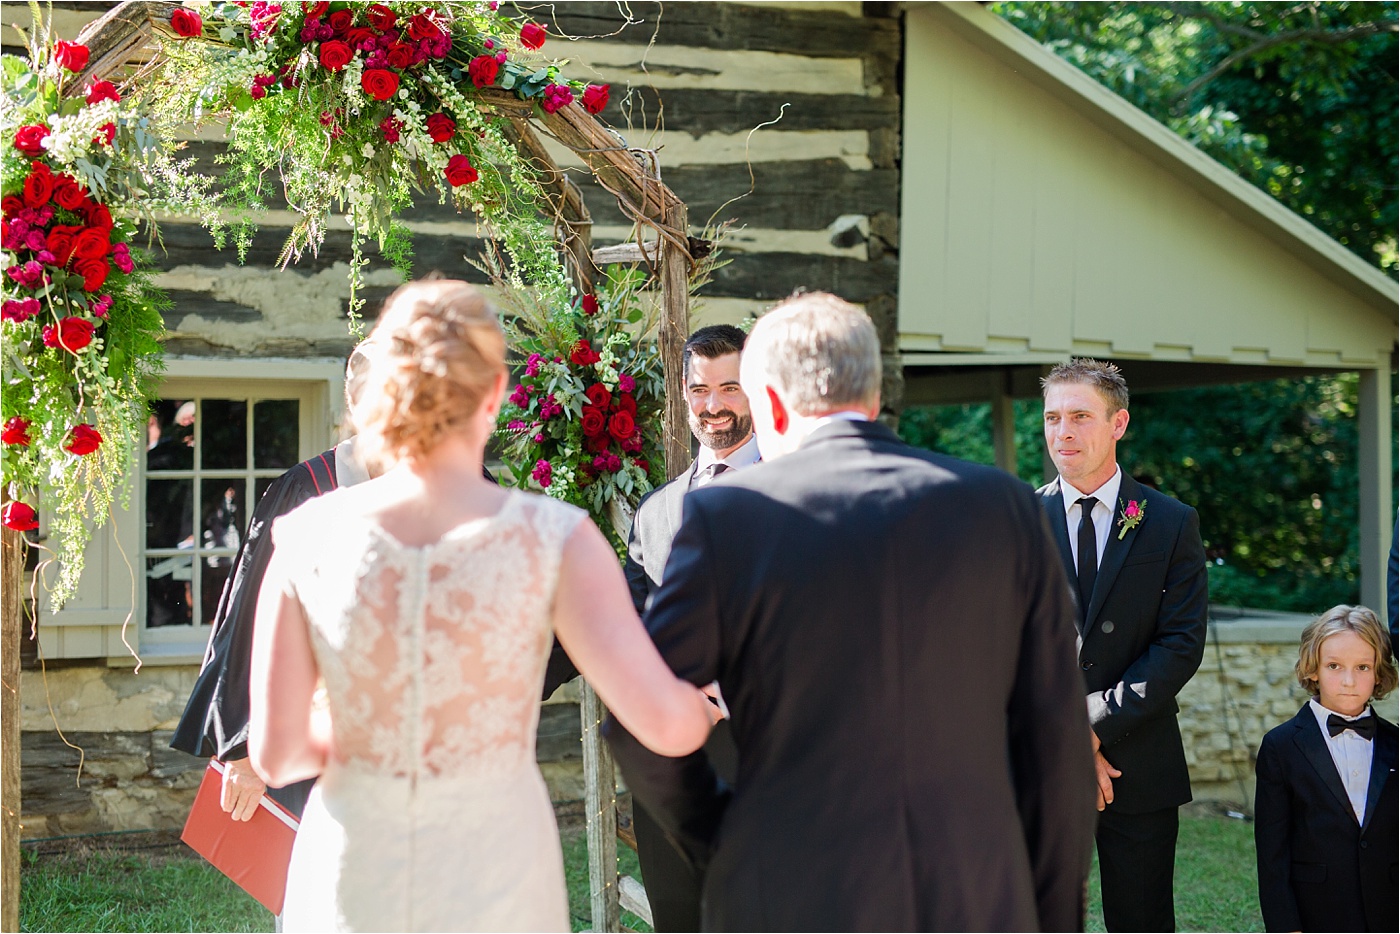 Wedding at a Cabin in the woods_0067